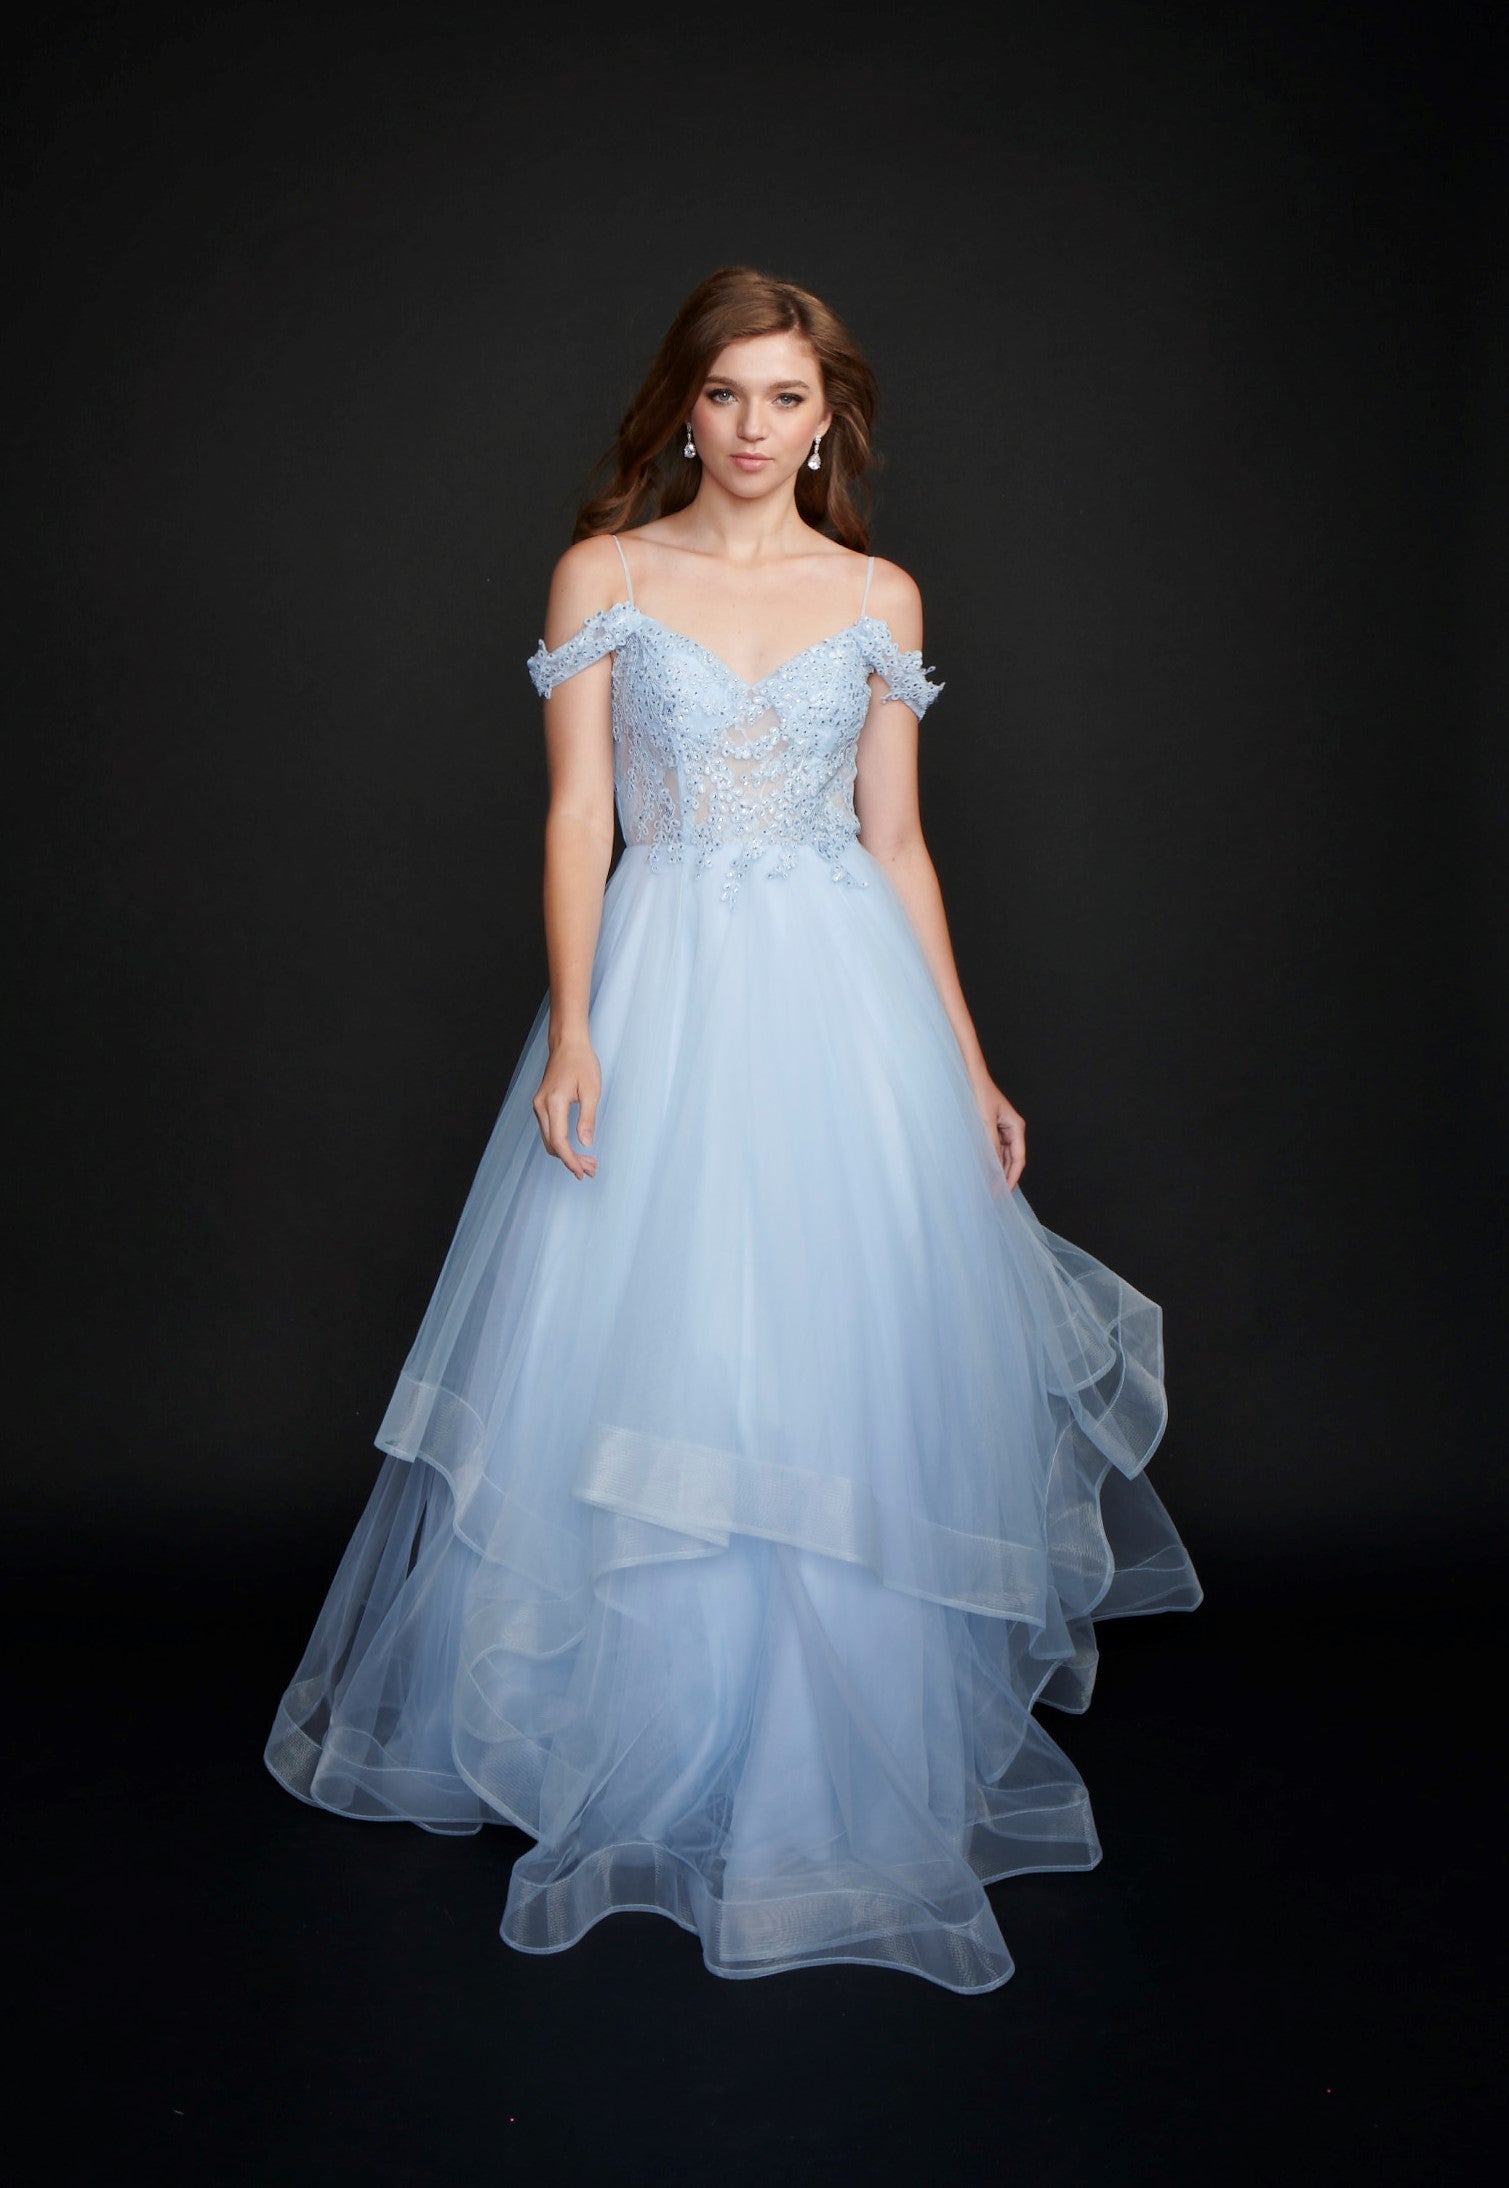 Nina Canacci 5205 Long Ballgown Prom Pageant Gown Long Sheer Ruffle Ballgown Prom Dress off the Shoulder Bridal Gown  Available Color- Ivory, Baby Blue  Available Size- 4-24